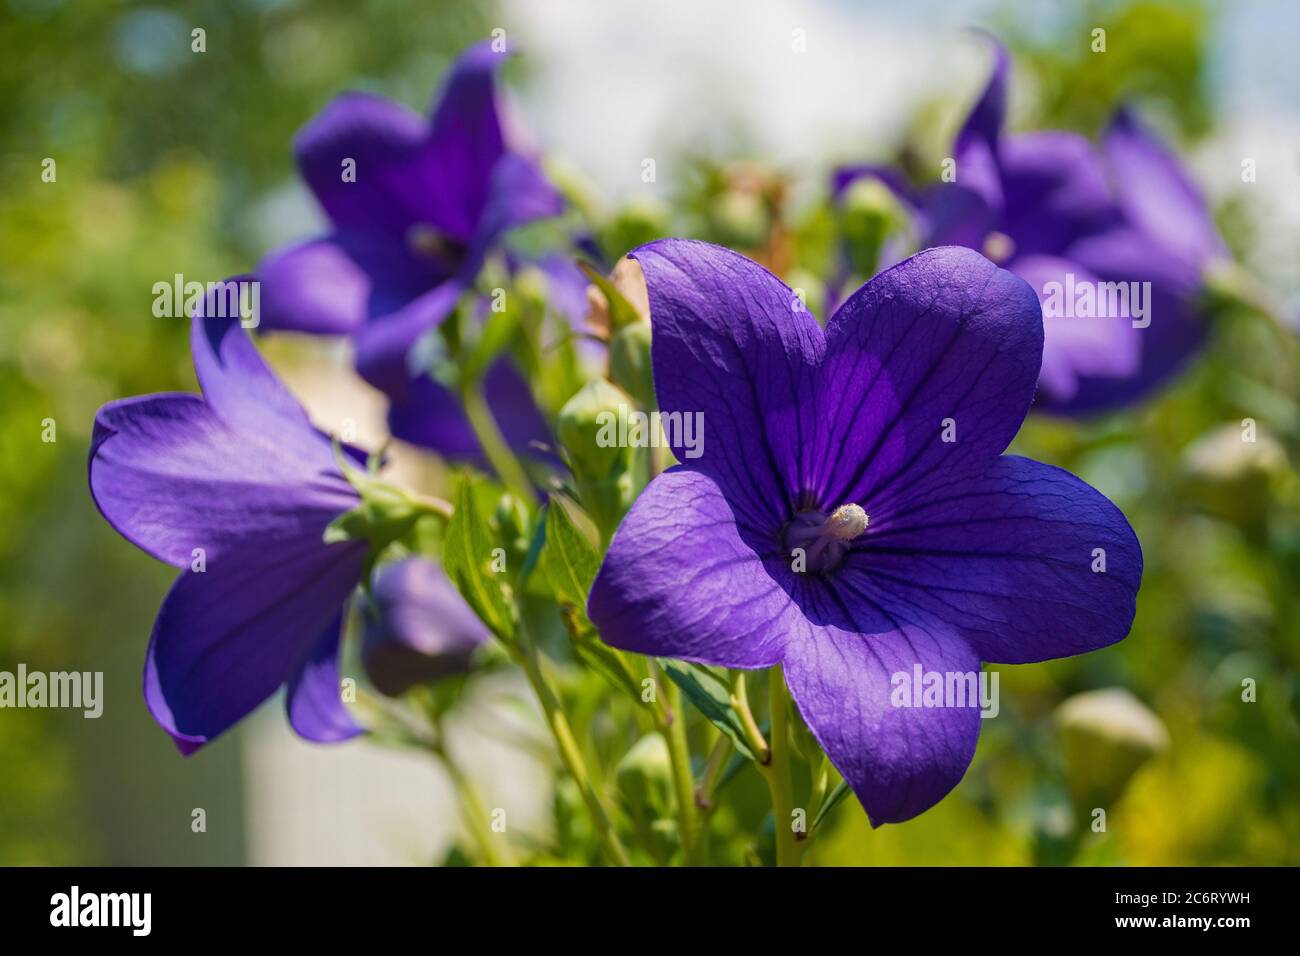 Flowers on a perennial blue purple Campanula Carpatica plant from the Campanulaceae family, also known as the Tussock Bellflower, American Harebell, C Stock Photo